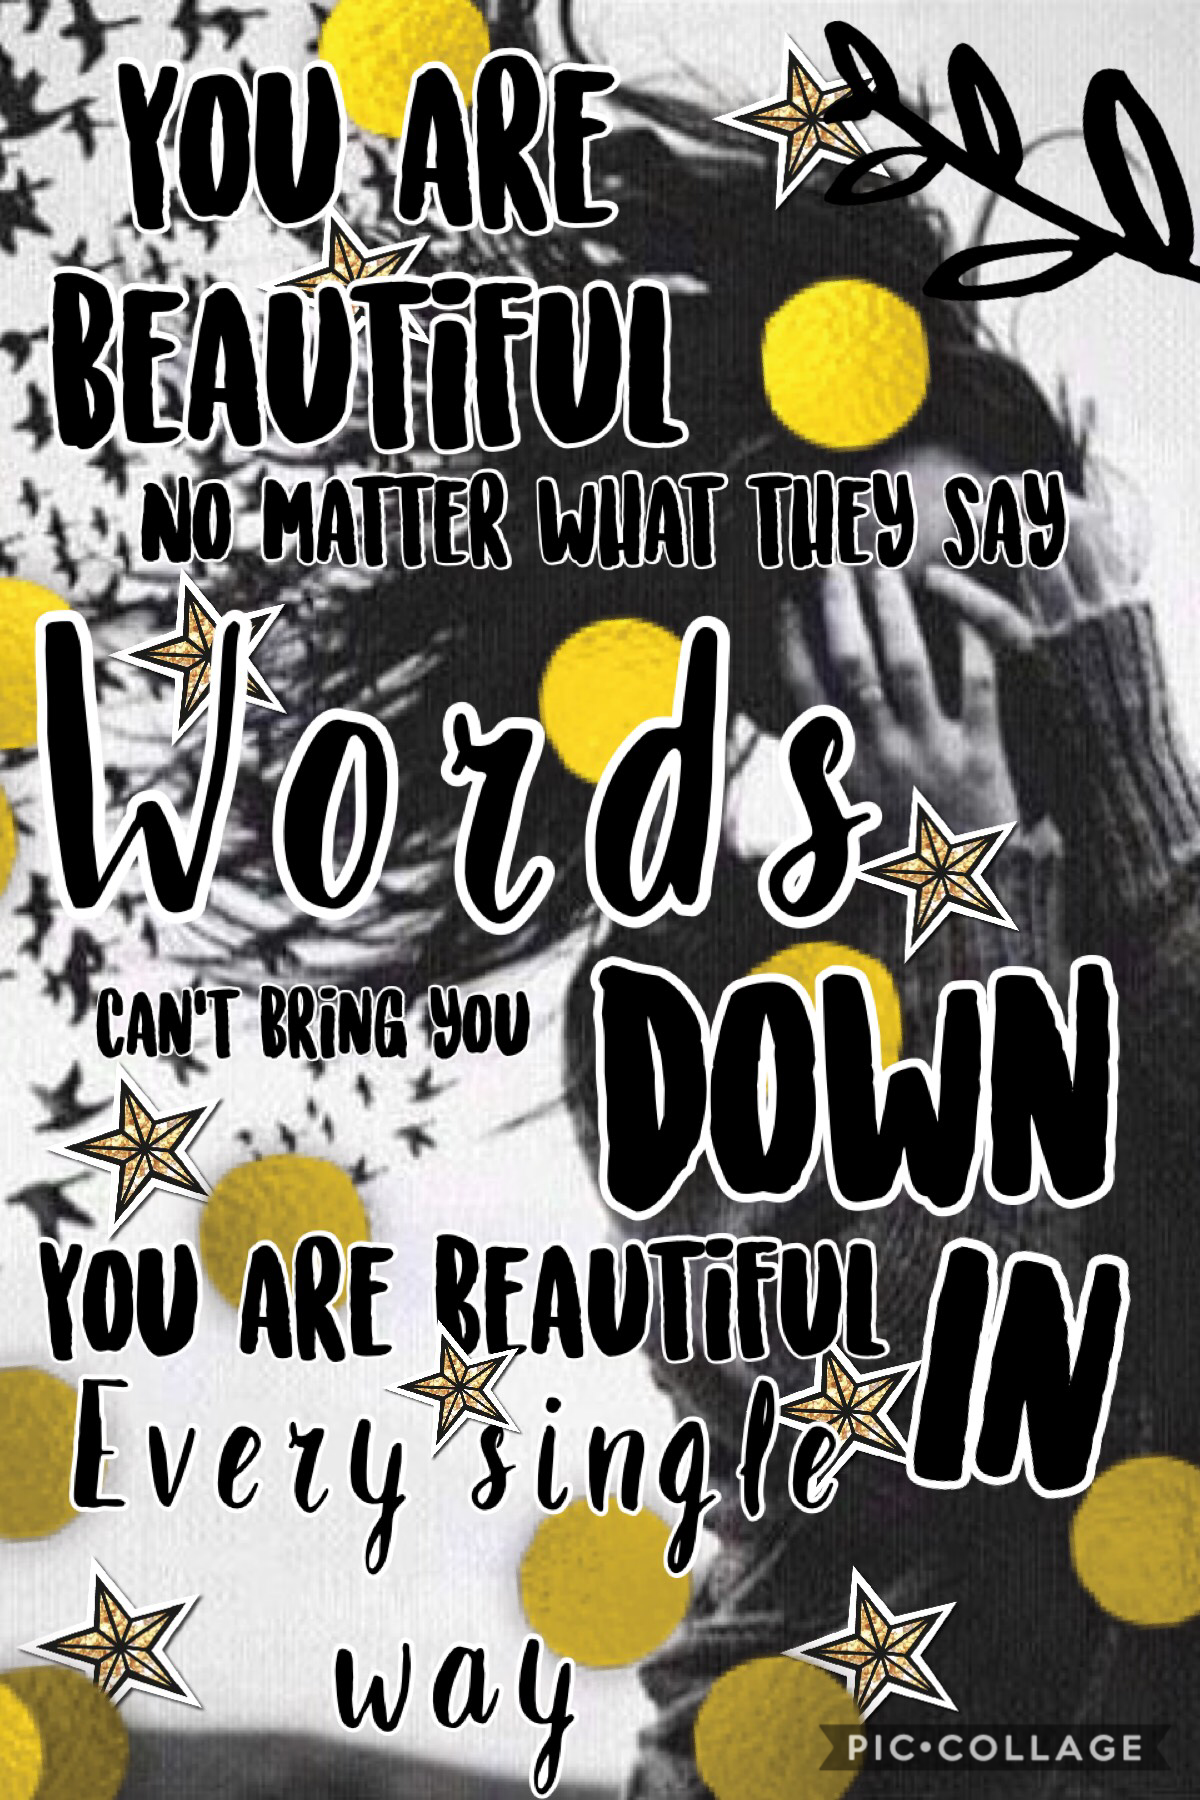 💛🖤You.are.beautiful. 🖤💛
In every single way. Words can’t bring you down. - Christina Aguilera 